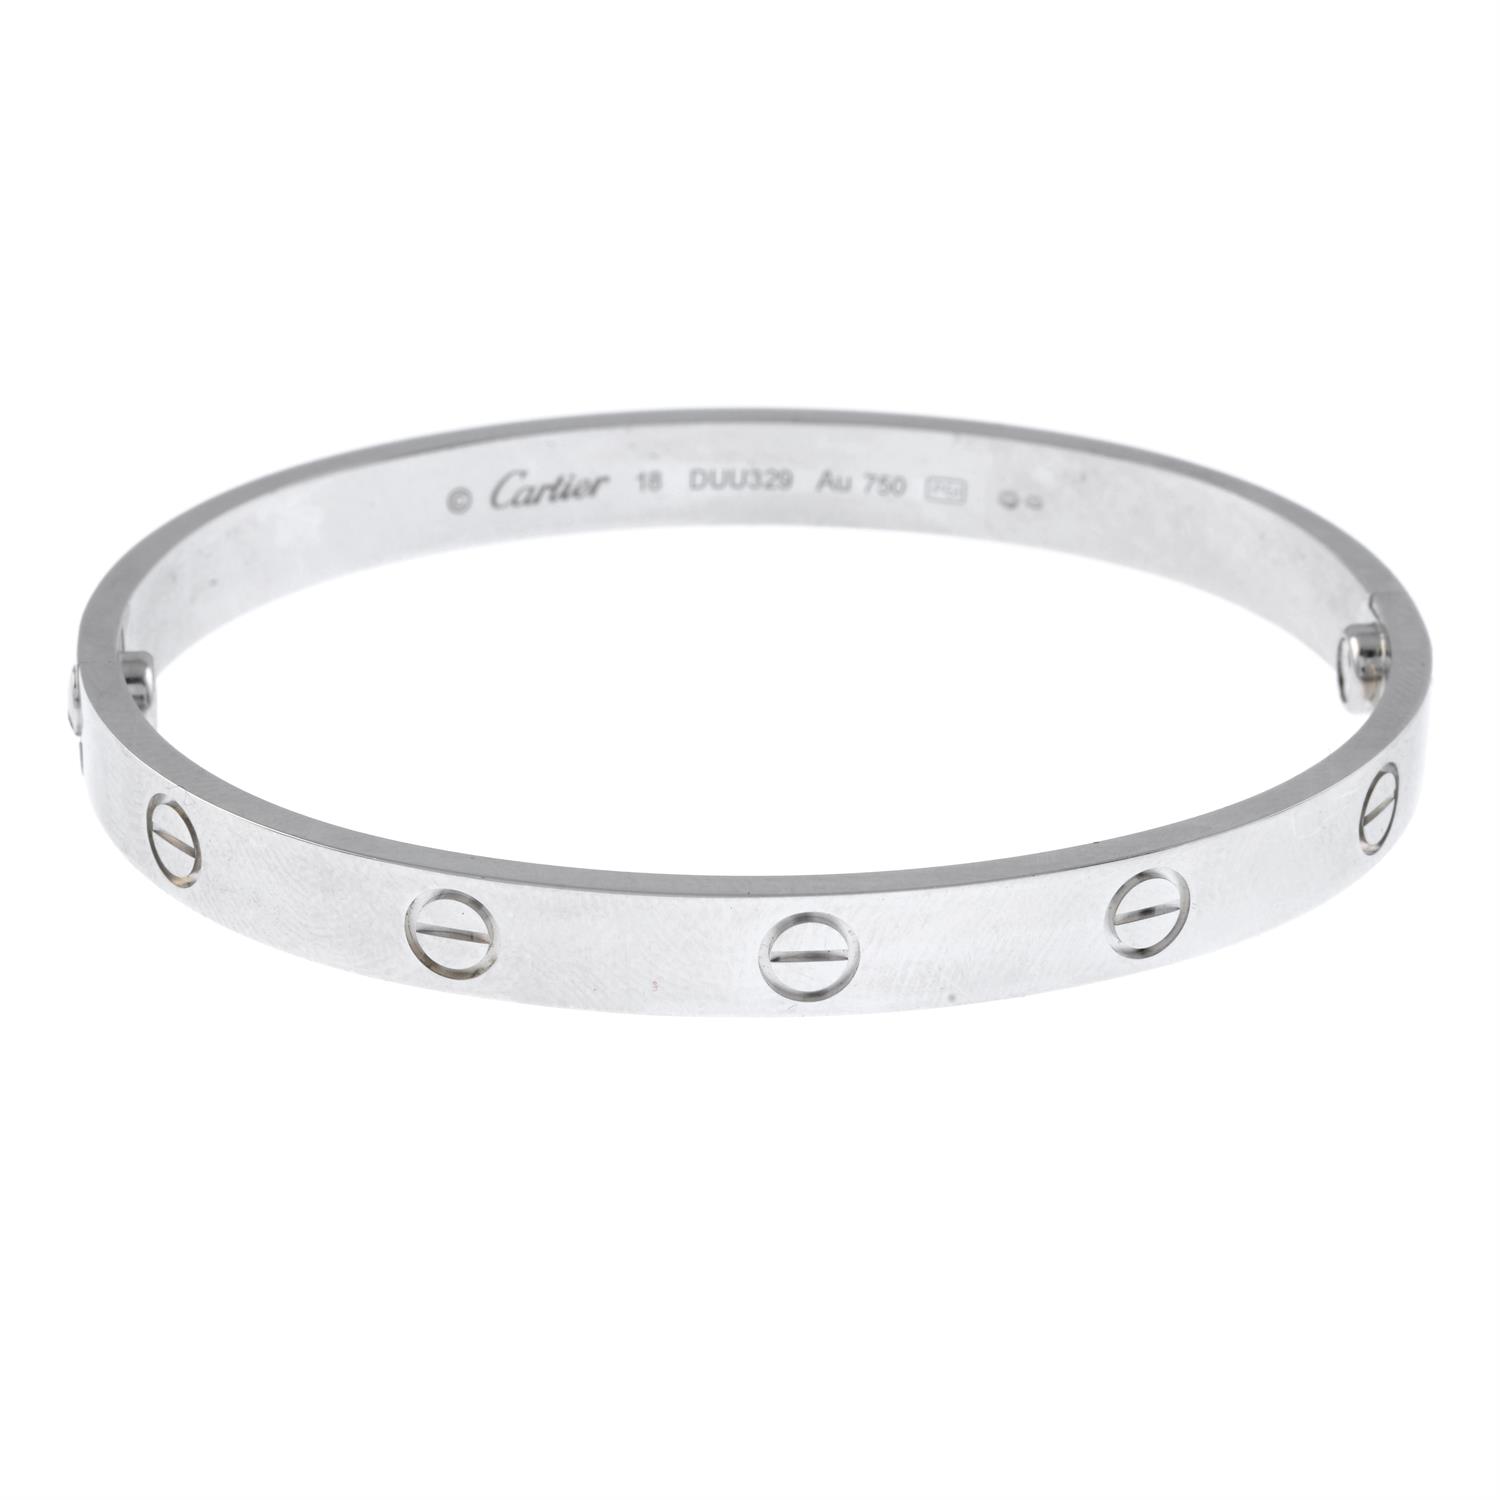 18ct gold 'Love' bangle, by Cartier - Image 2 of 4